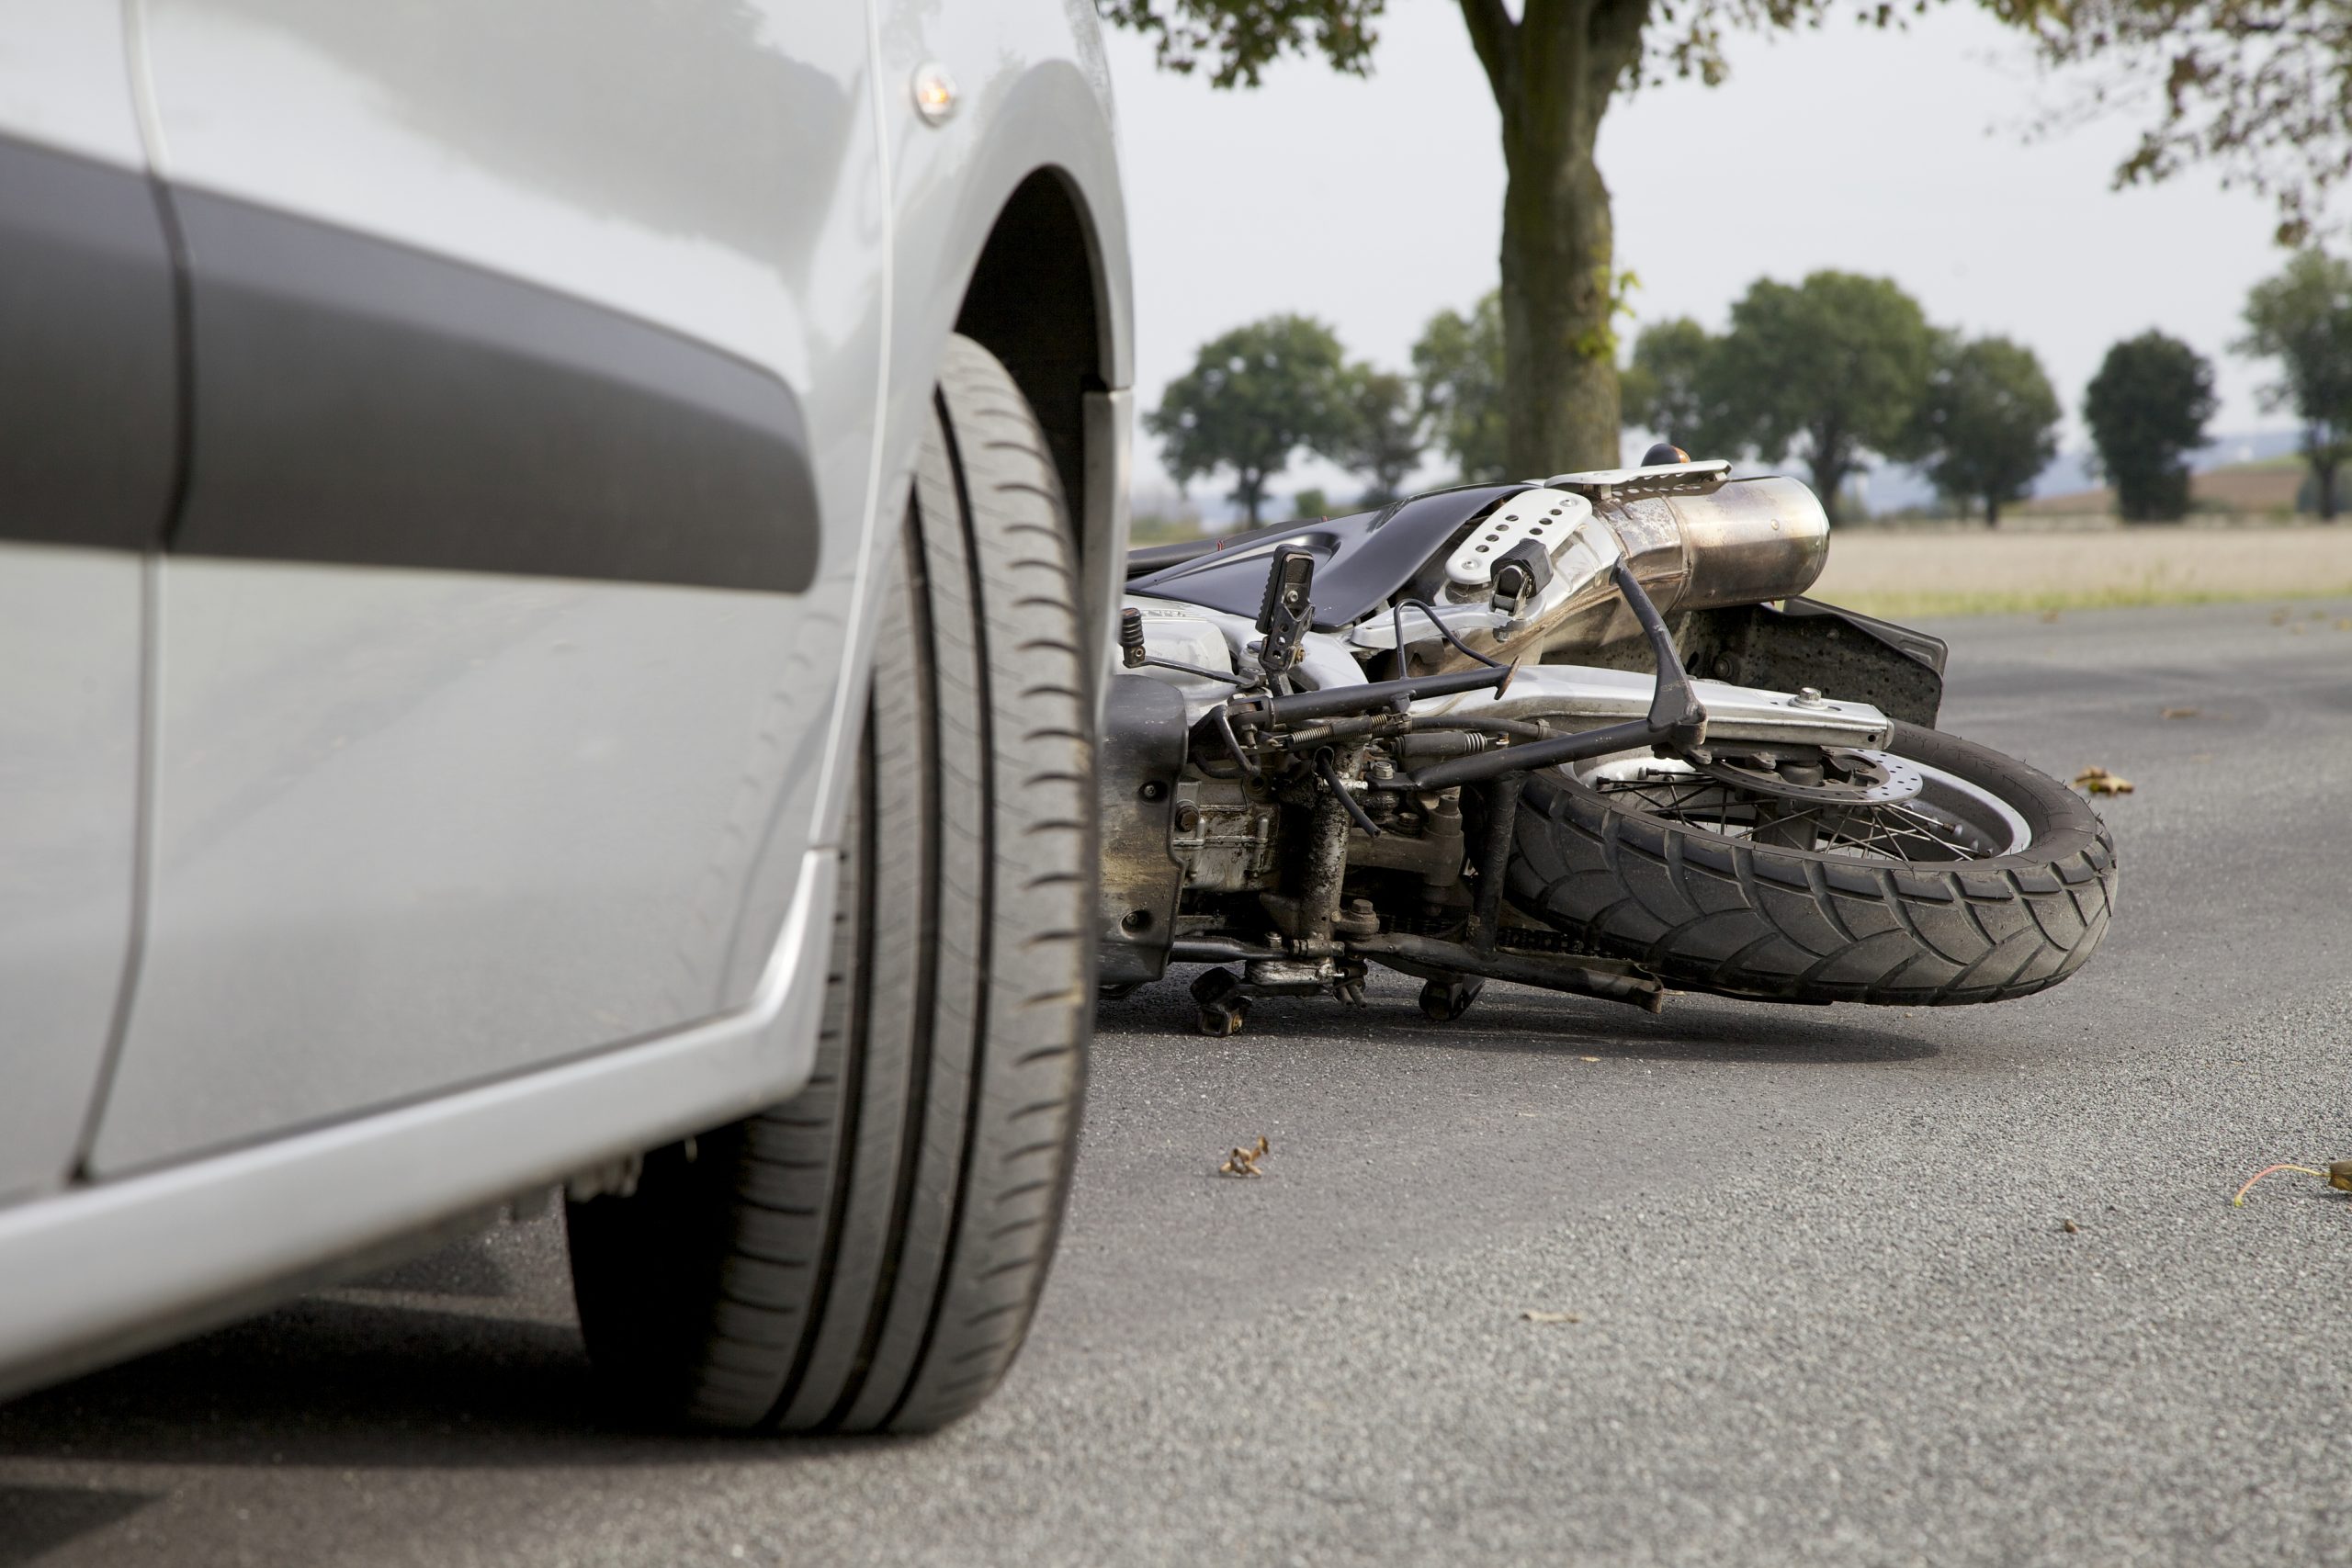 5 Tips For Filing A Motorcycle Accident Insurance Claim